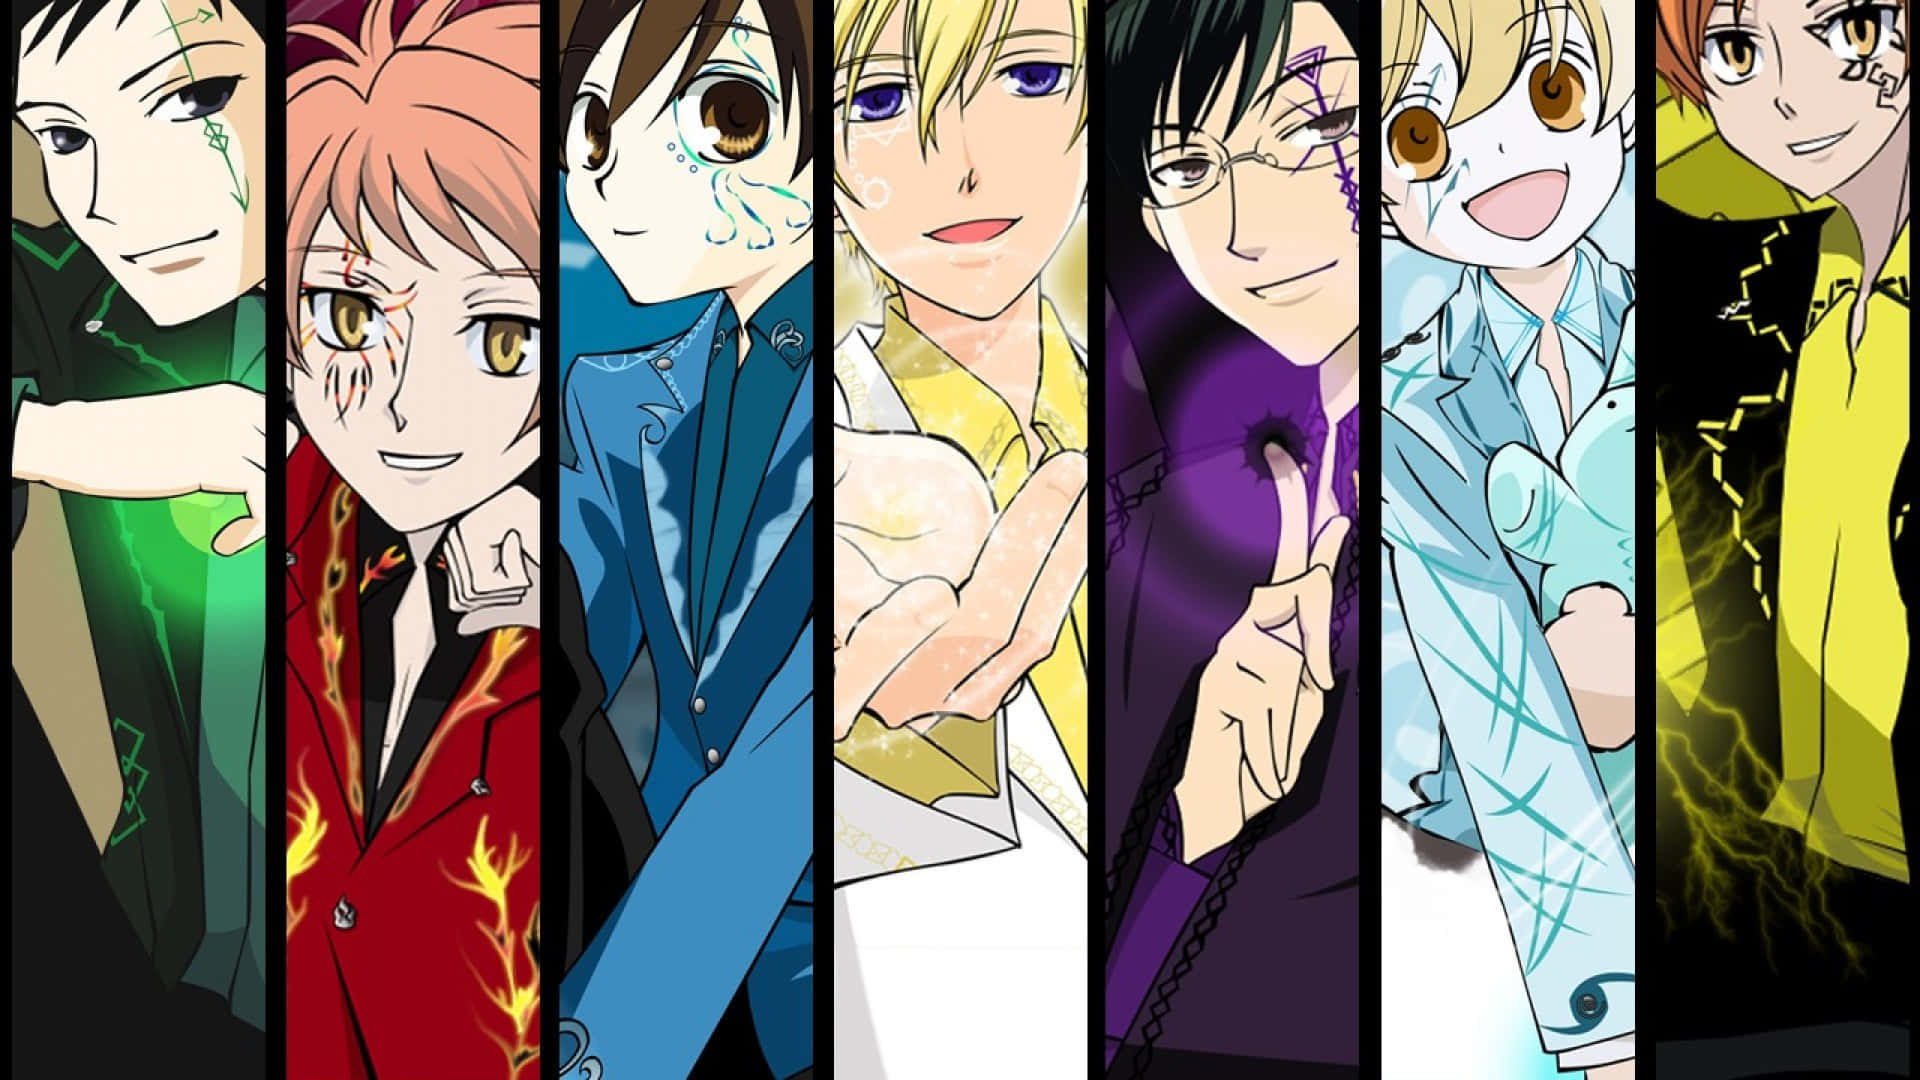 Ouran High School Host Club members posing together with a rose background Wallpaper